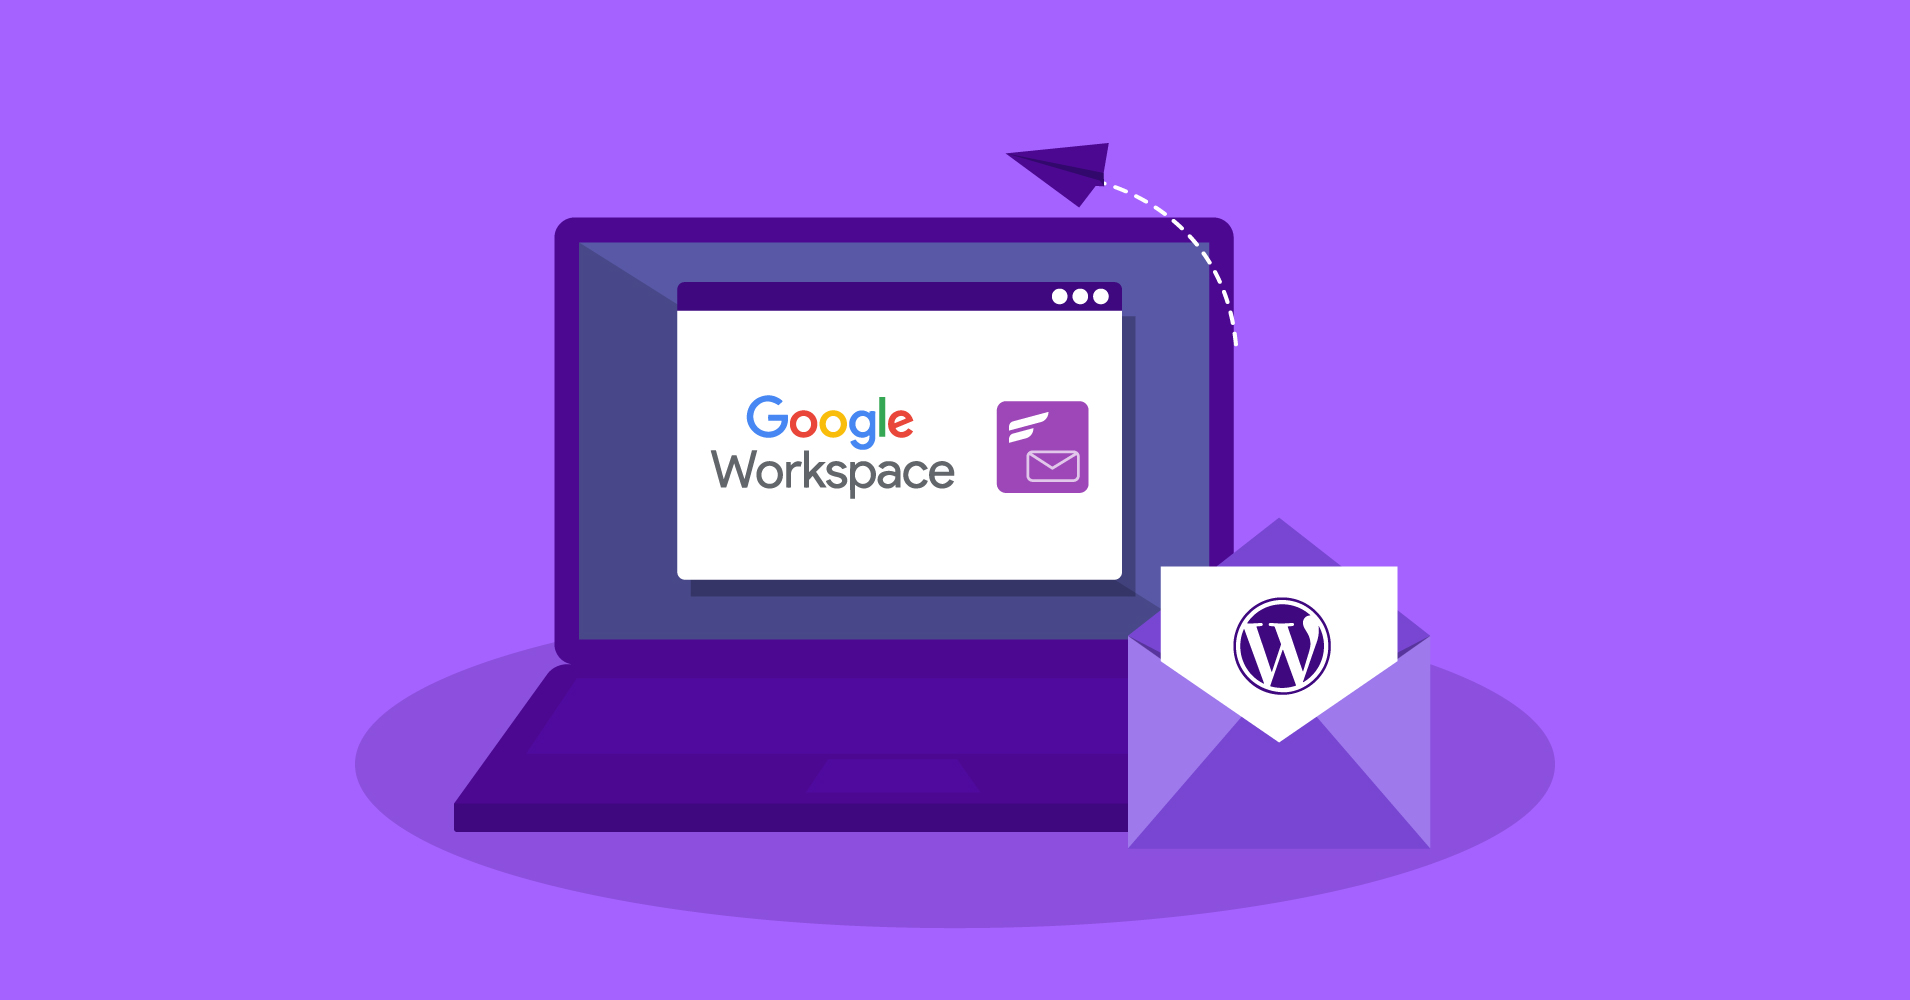 How to send wordpress emails with google workspace SMTP